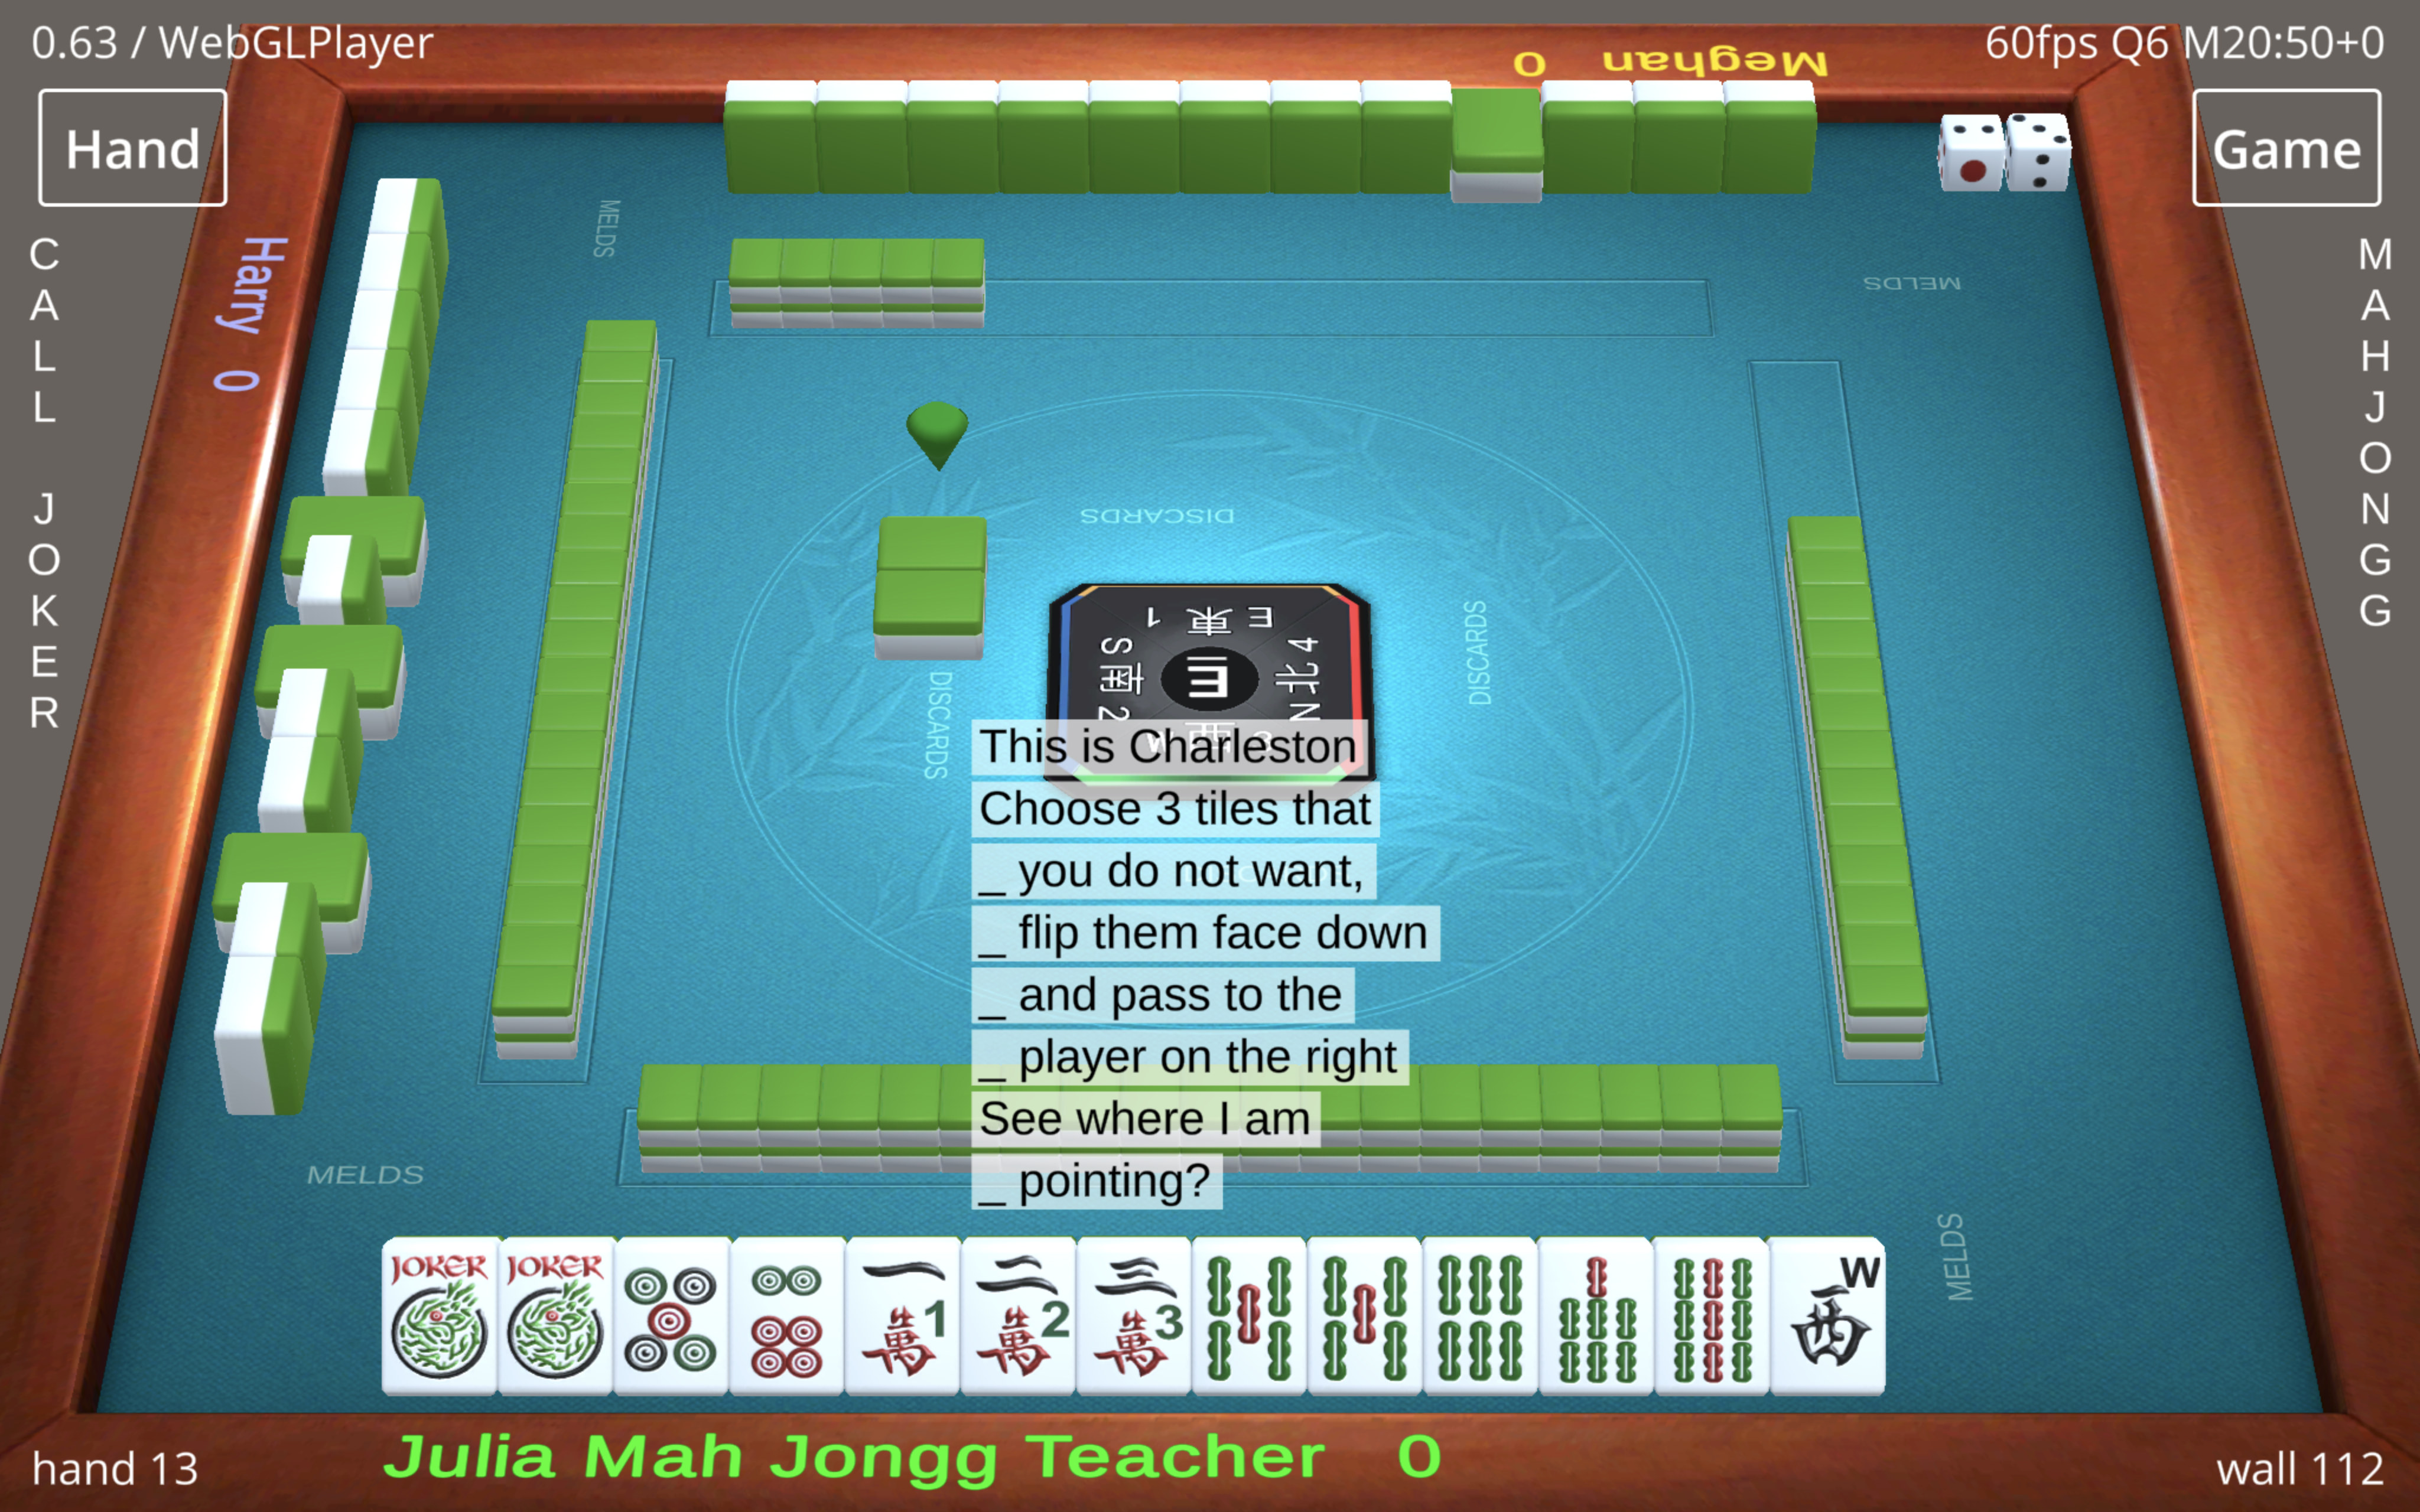 Mahjong Friends Online – Play Mahjong with your friends now